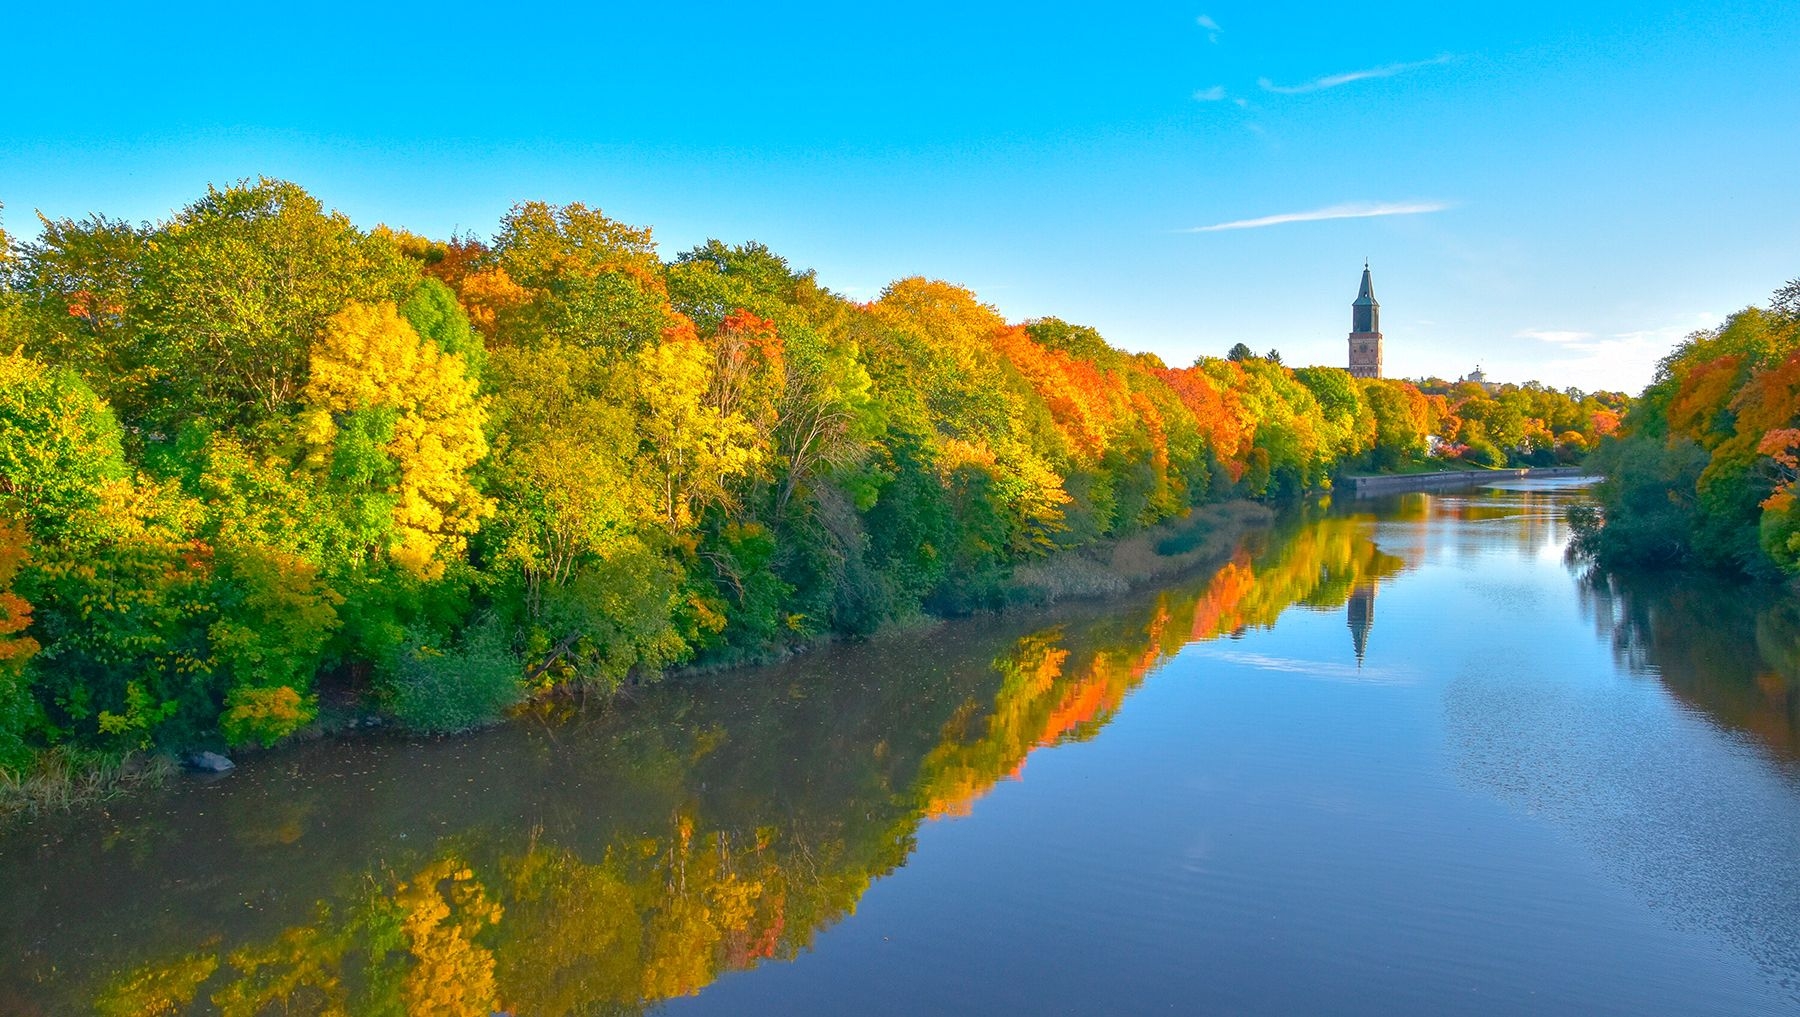 Autumn-coloured trees line the Aura River, with Turku Cathedral in the background.